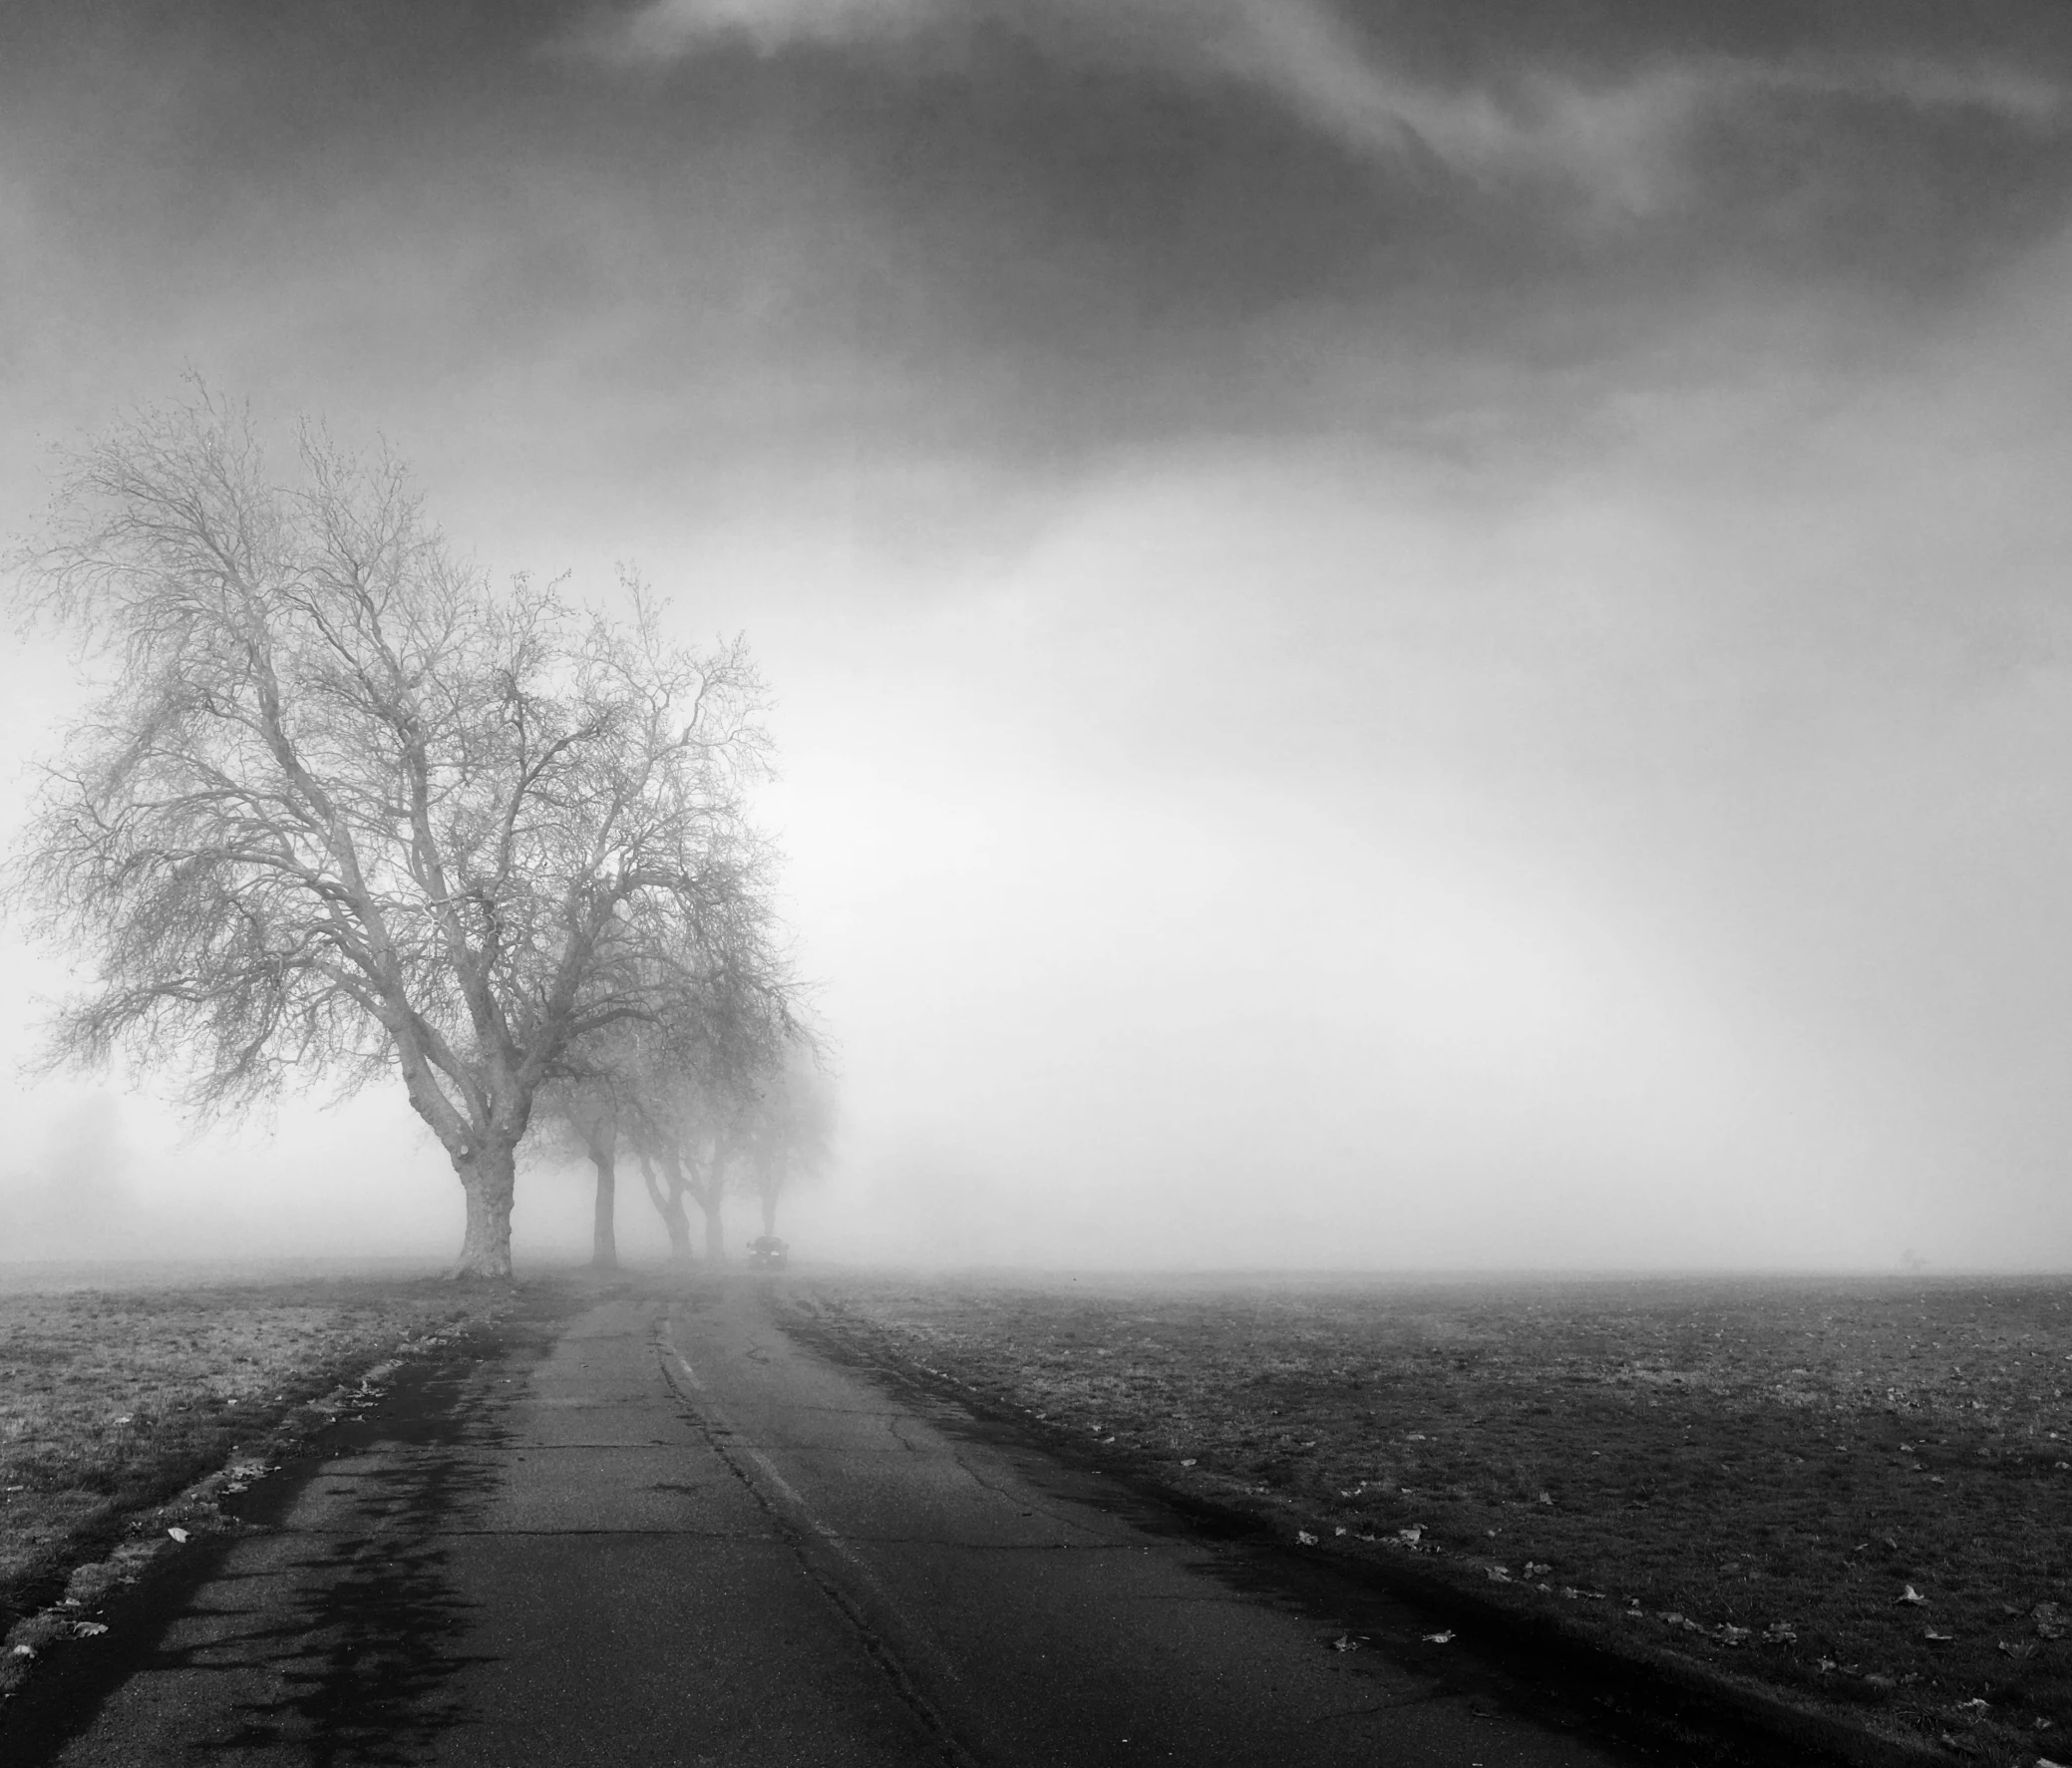 fog blankets trees and the road with no traffic